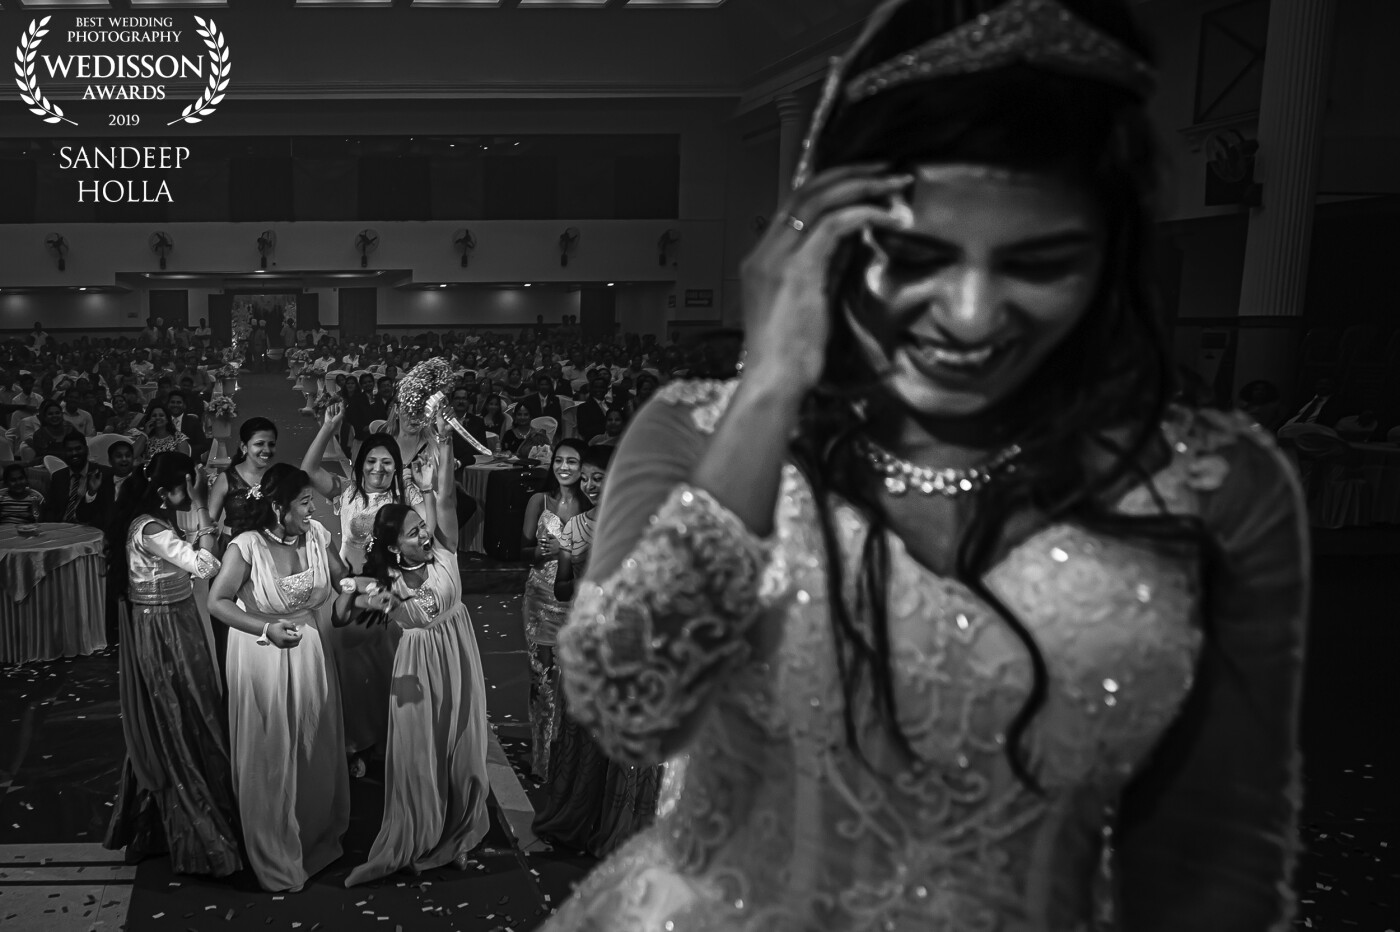 A keen moment and the shot was achieved only with the observation and being ready.<br />
Divya had an amazing wedding and also some amazing memories to cherish! We from Blink Films made every moment count! 